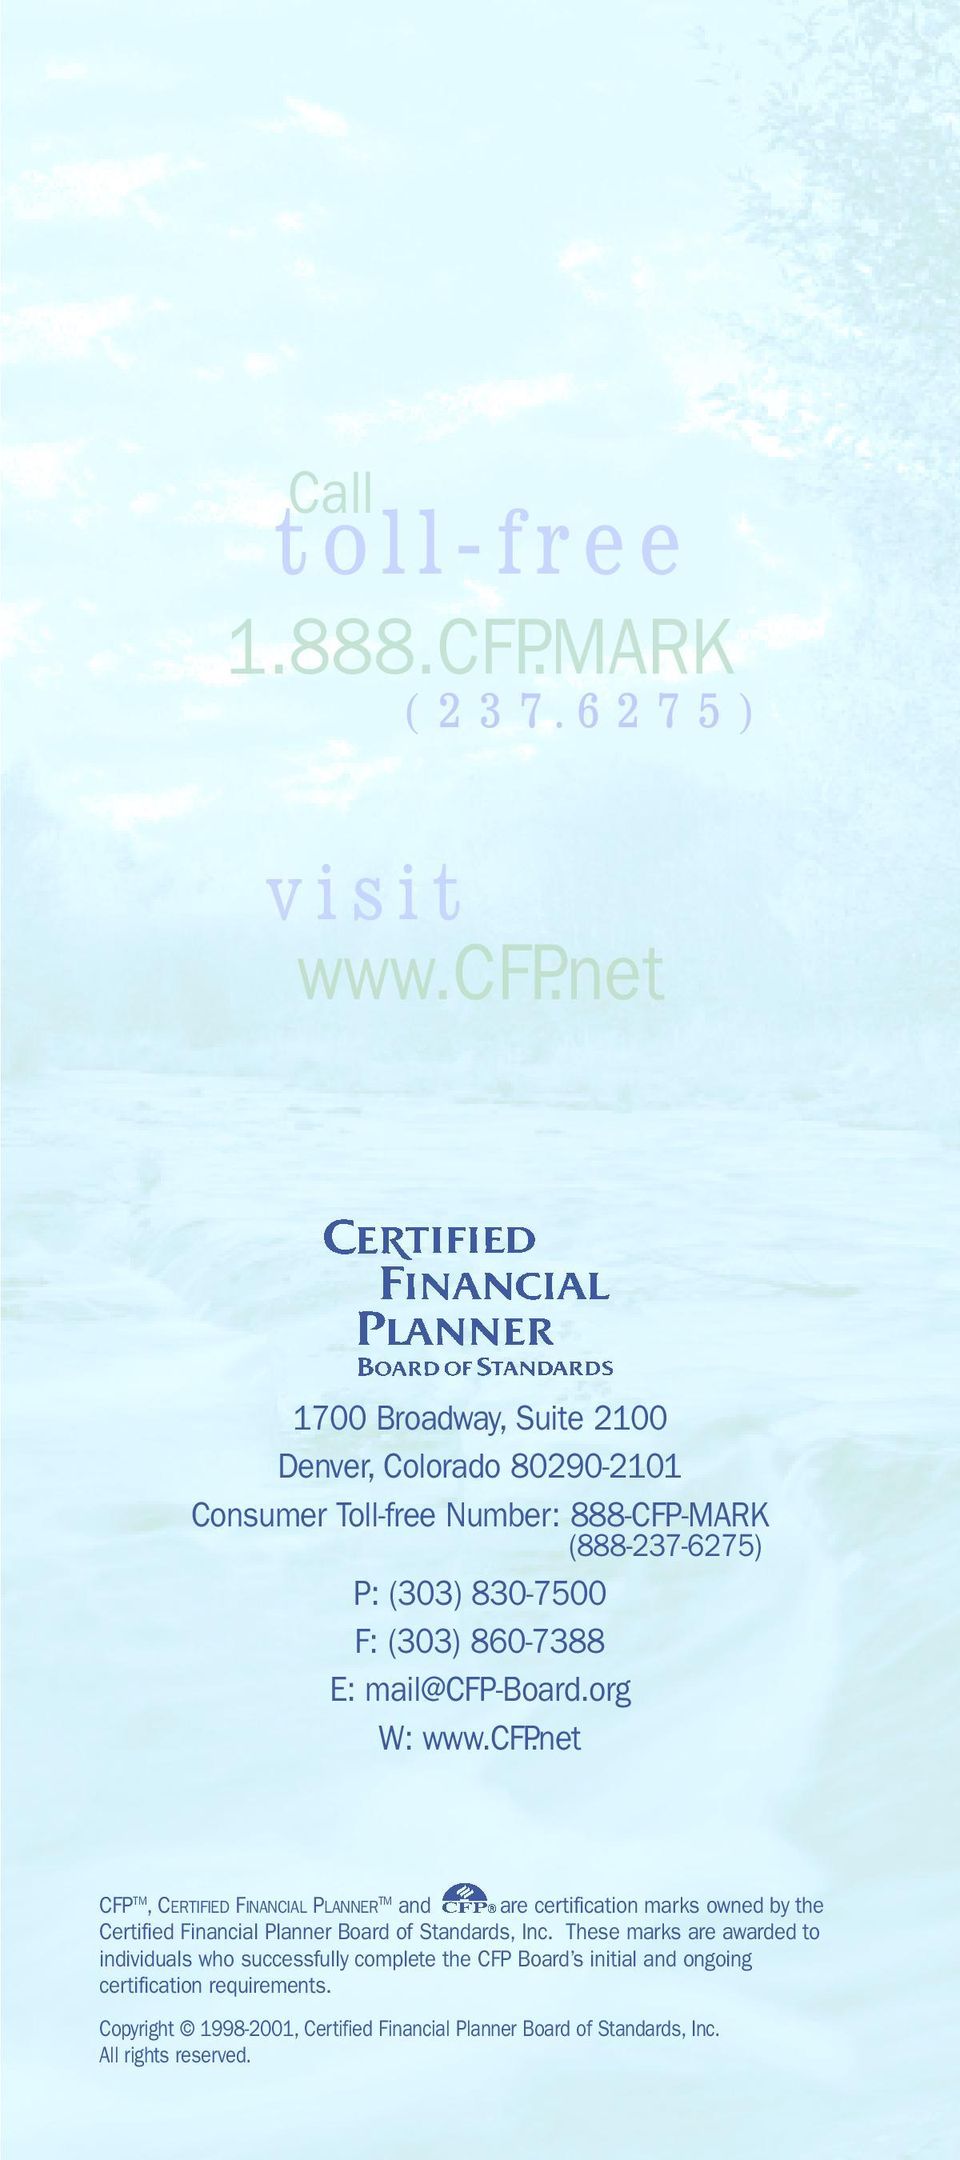 E: mail@cfp-board.org W: www.cfp.net CFP TM,CERTIFIED FINANCIAL PLANNER TM and are certification marks owned by the Certified Financial Planner Board of Standards, Inc.